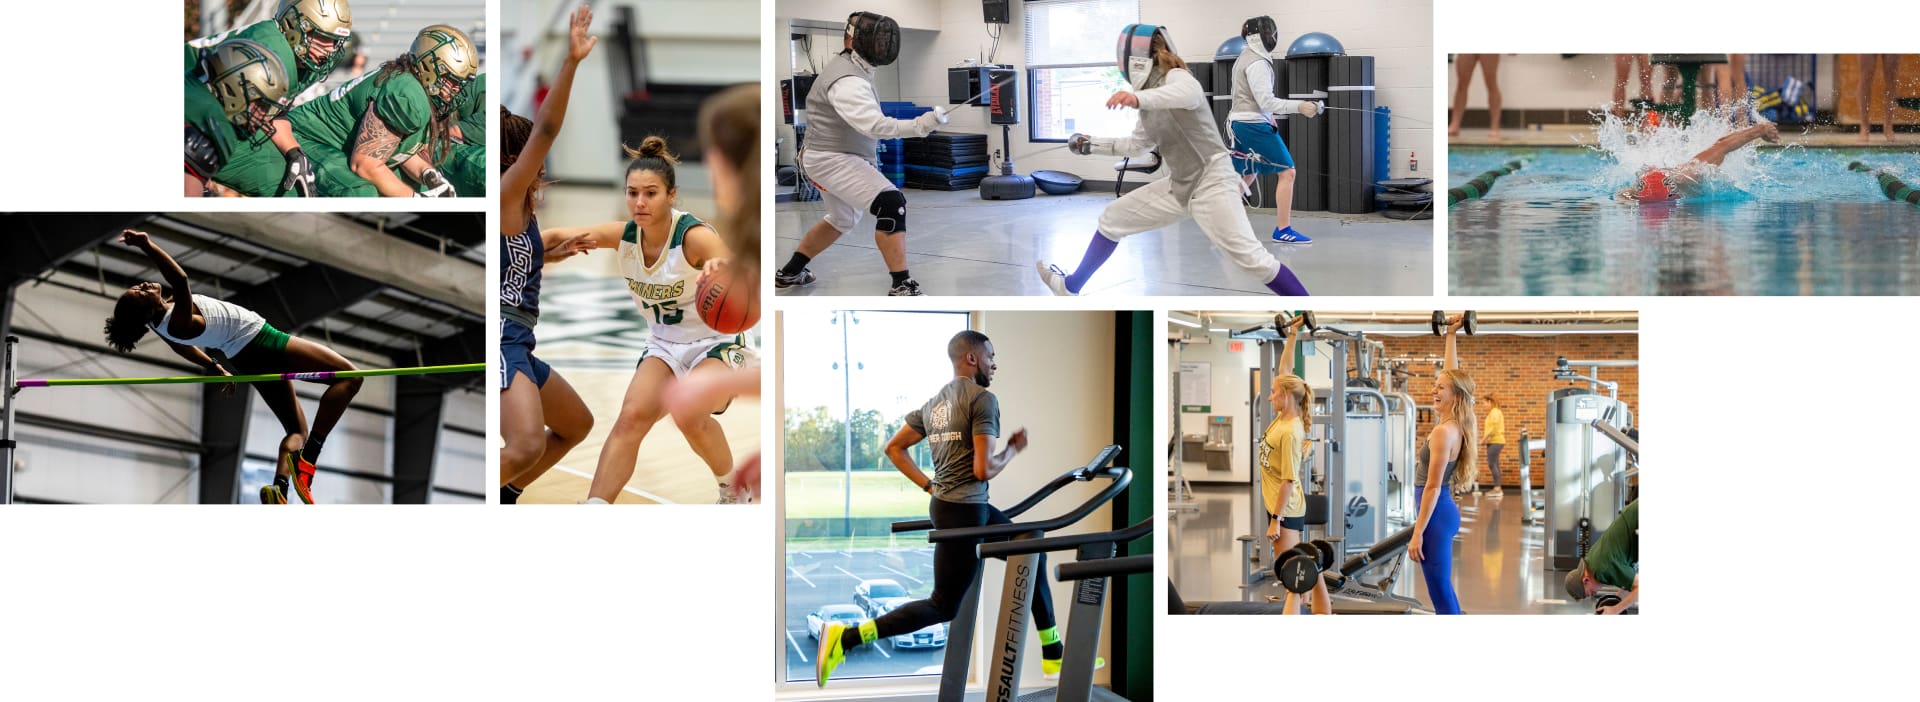 A collage of photos: football, pole vautling, basketball, fencing, running on treadmill, lifting weights, swimming in pool